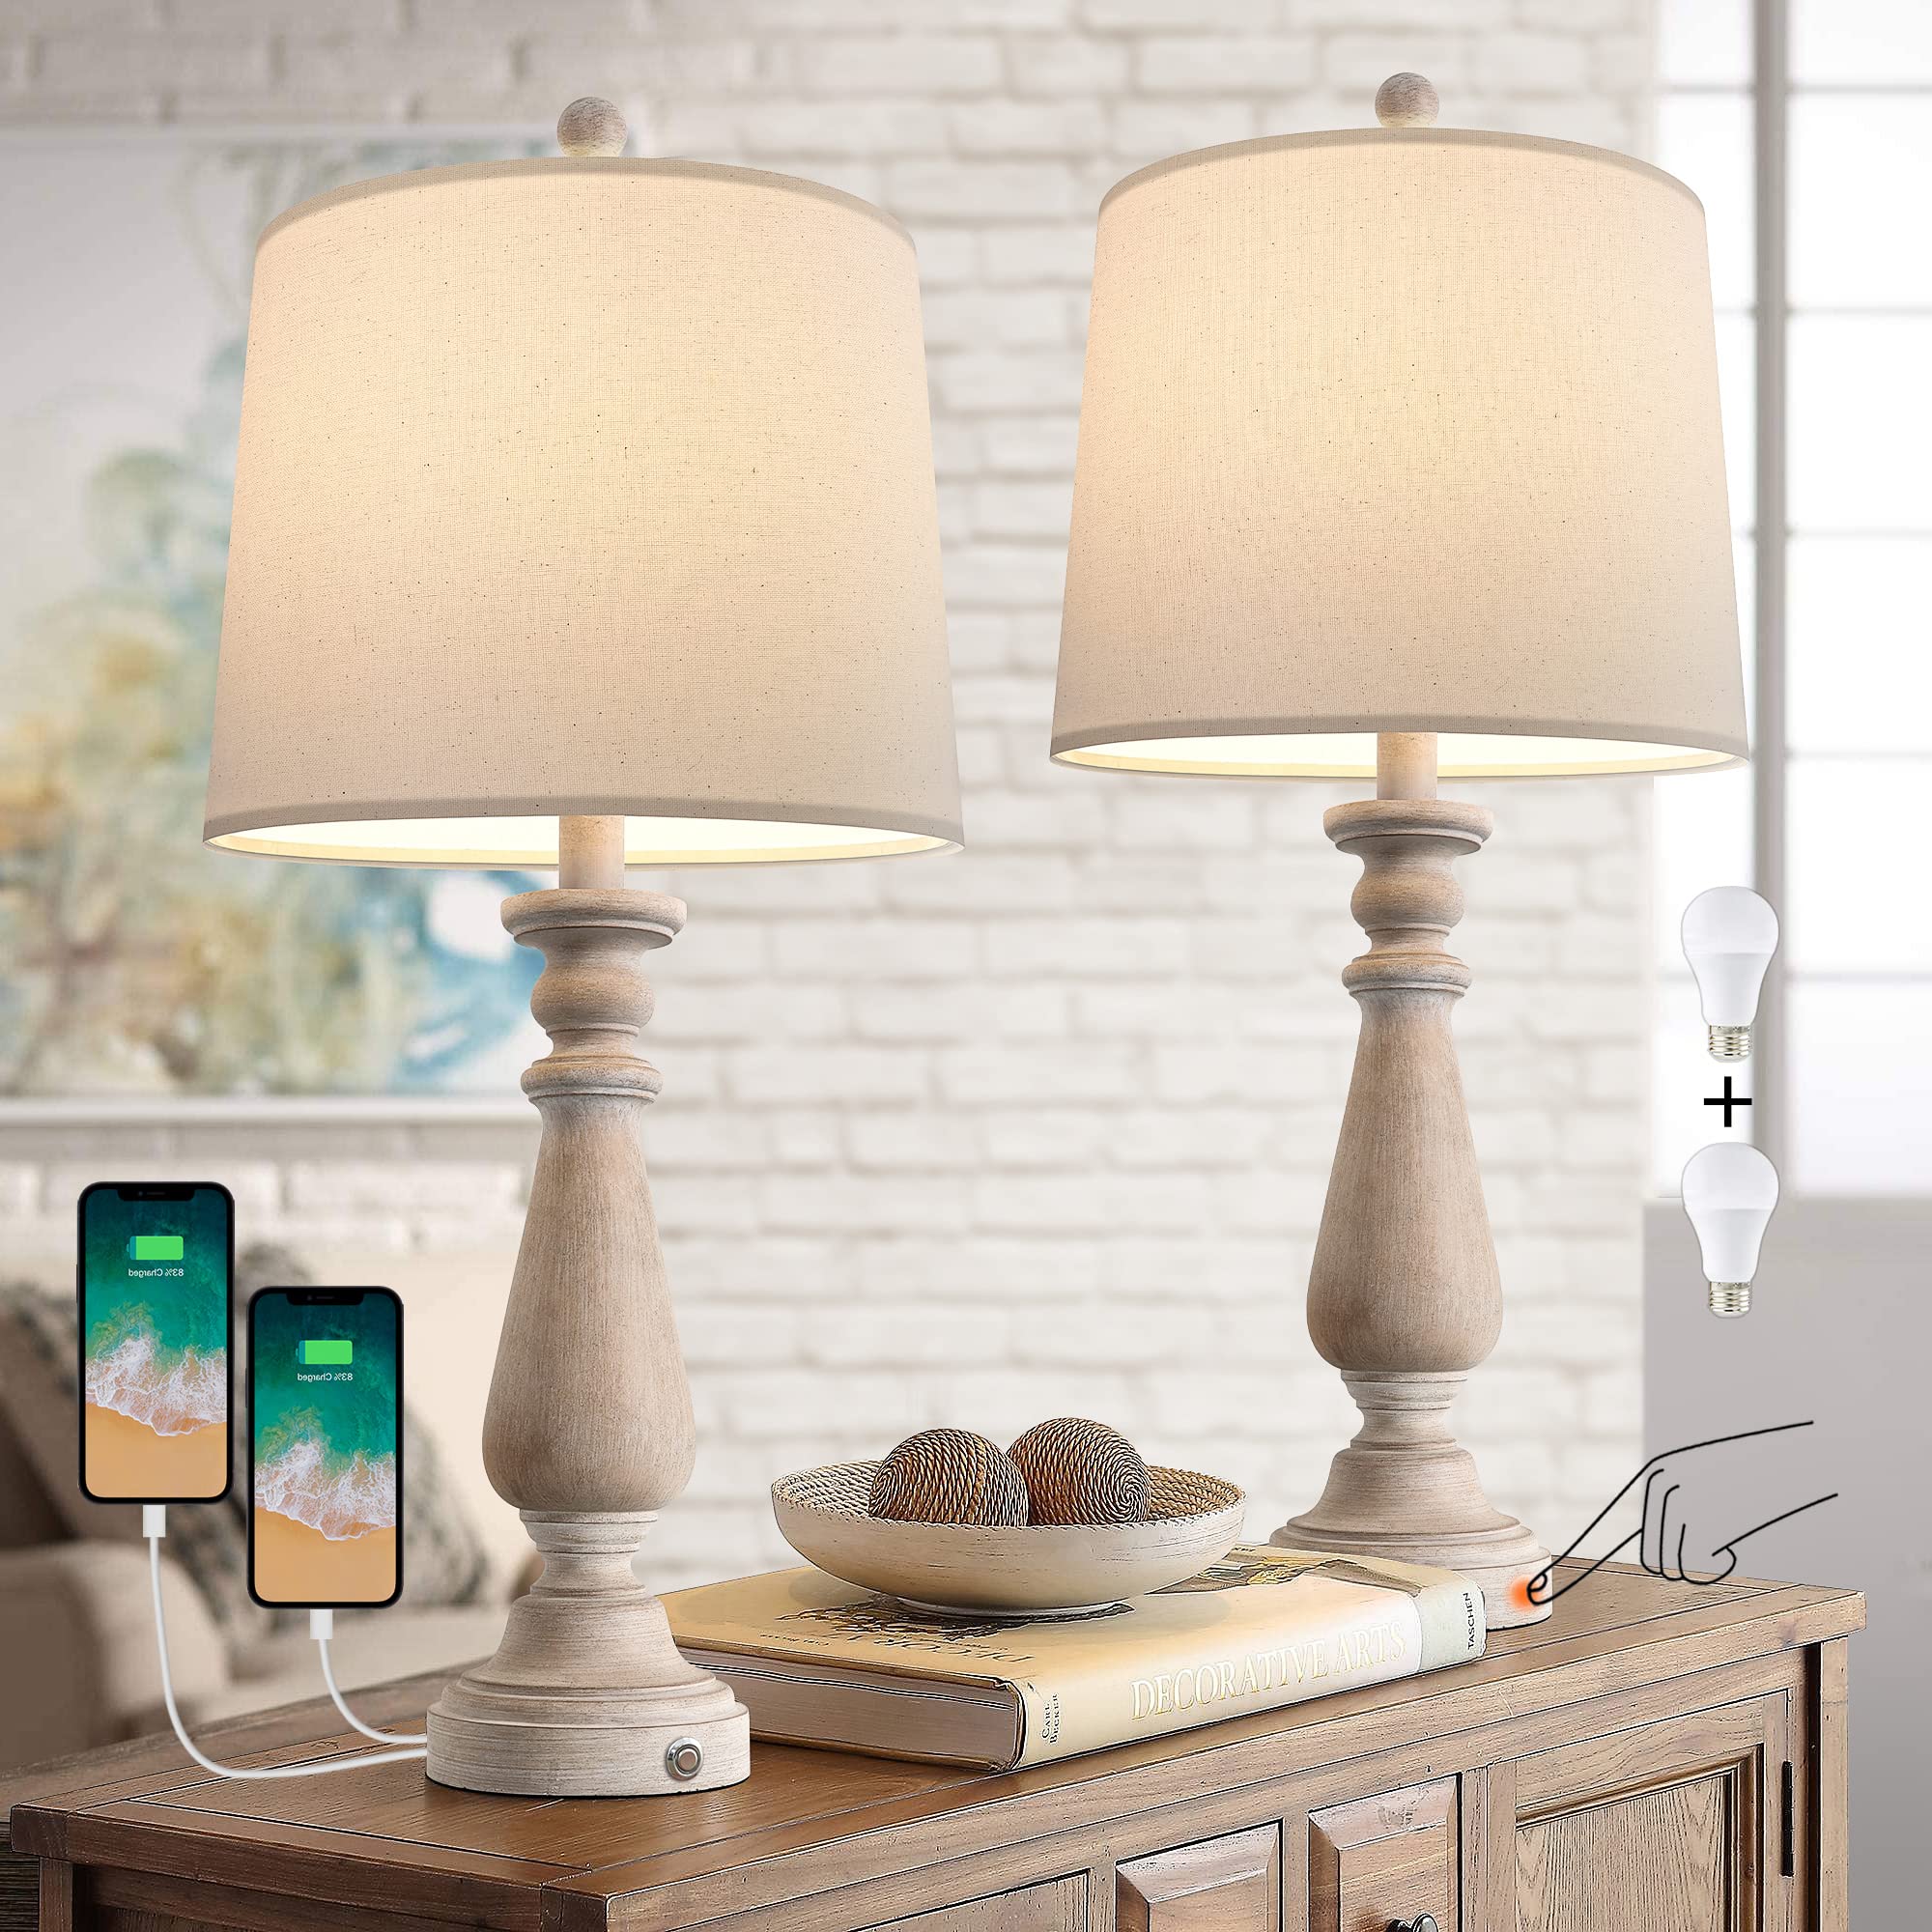 PORTRES Portres 2575 Inches 3 - Way Dimmable Touch Lamps Set